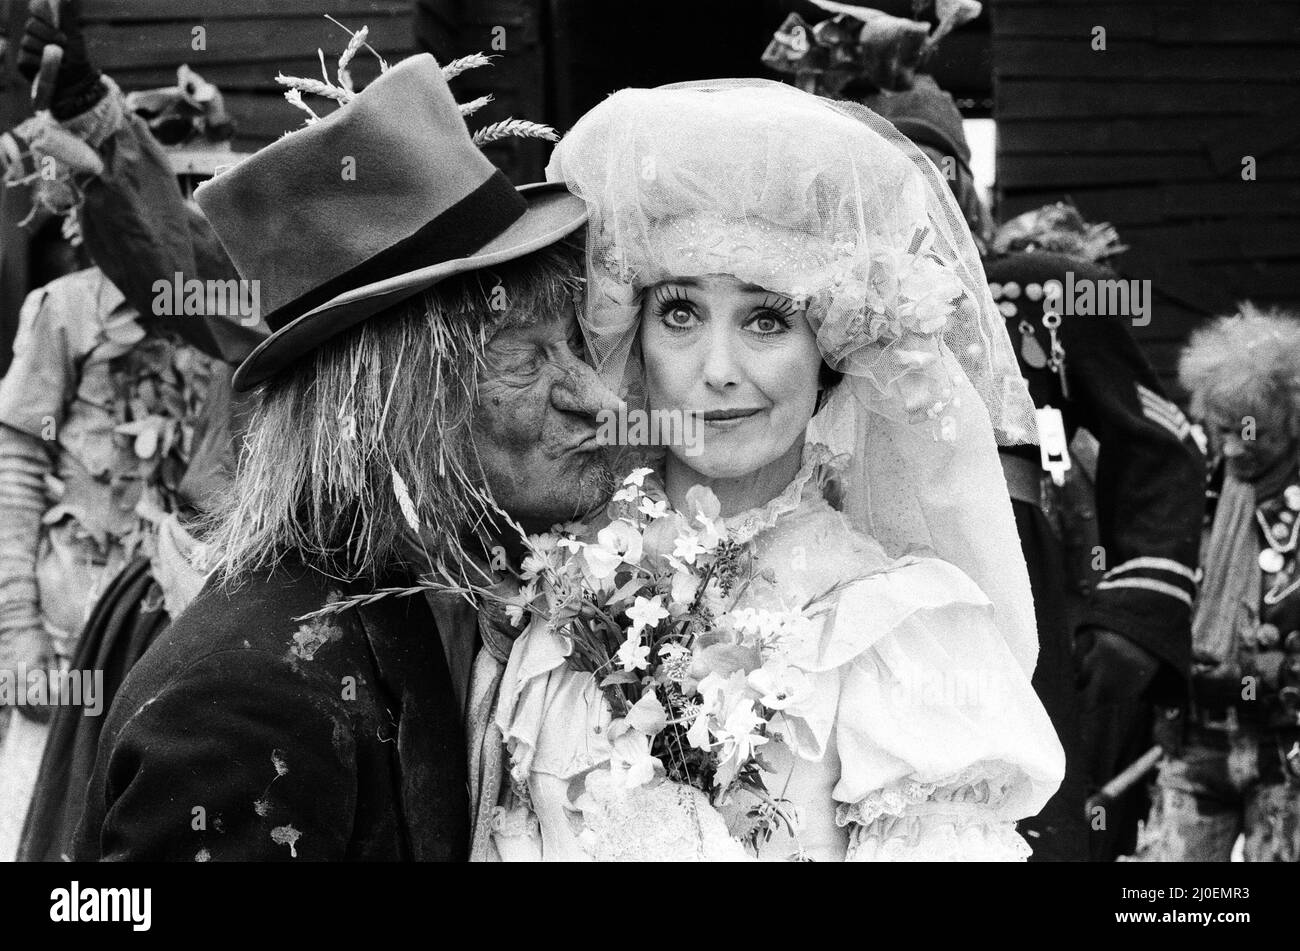 Television character Worzel Gummidge who is played by Jon Pertwee marries his Aunt Sally, played by Una Stubbs, in a barn at Braishfield, near Romsey, Hants. The guests at the wedding included Barbara Windsor, Bill Maynard with several scarecrows. 3rd July 1979. Stock Photo